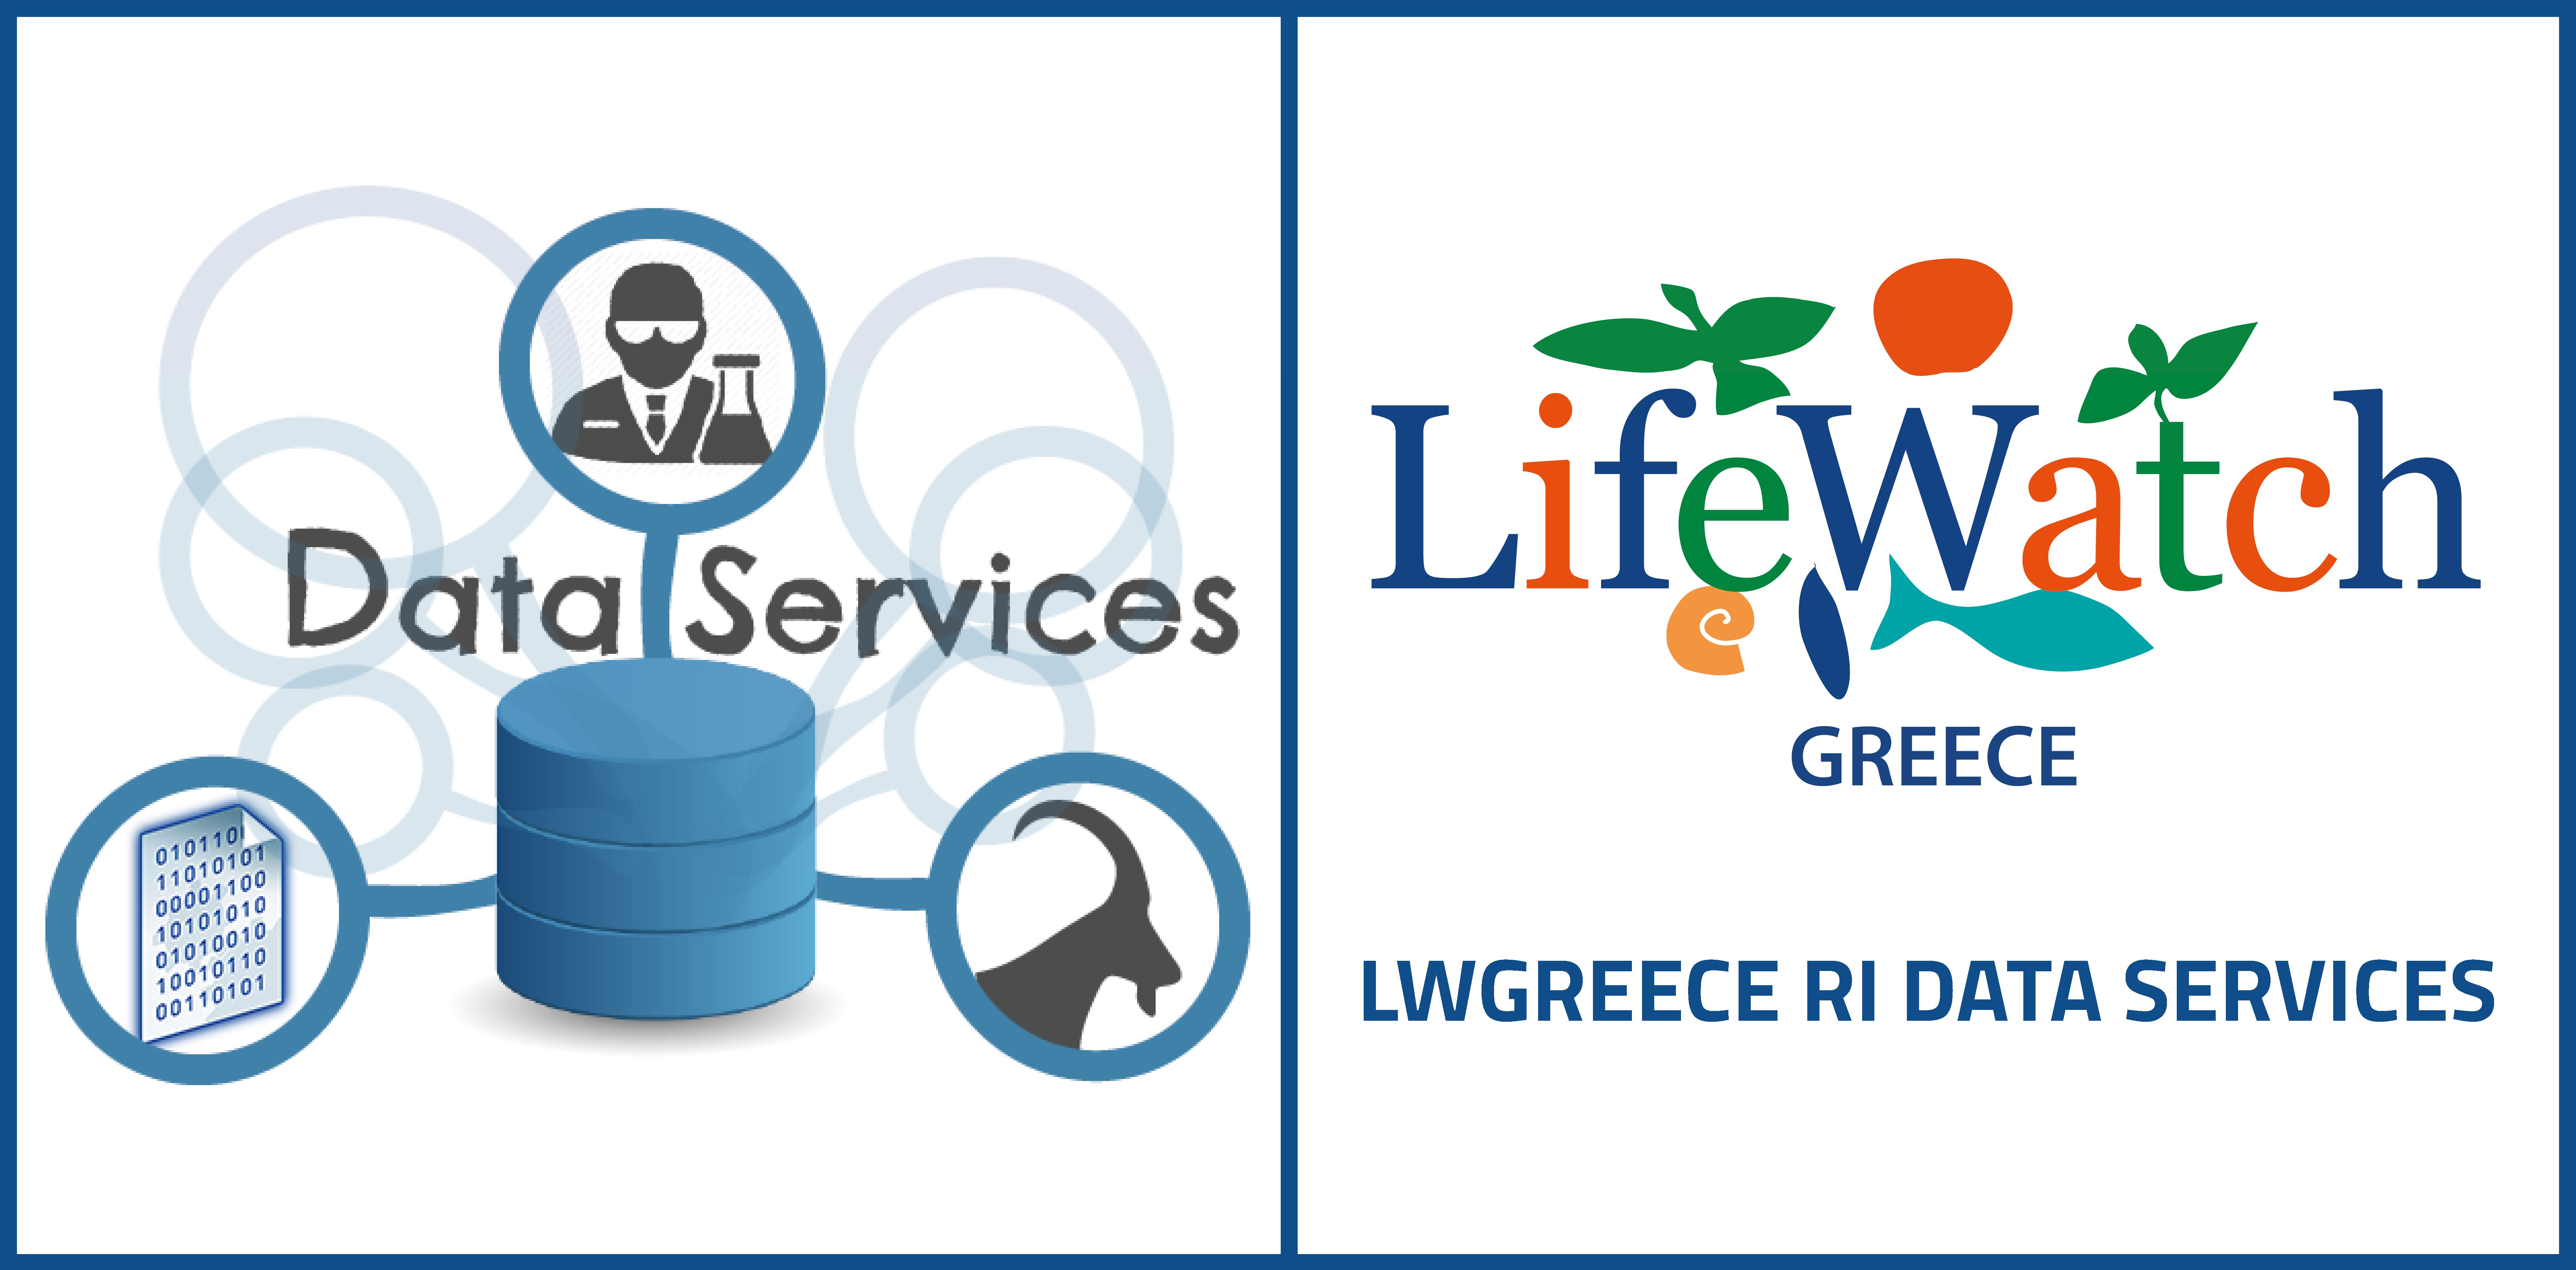 LWGreece Research Infrastructure Data Services